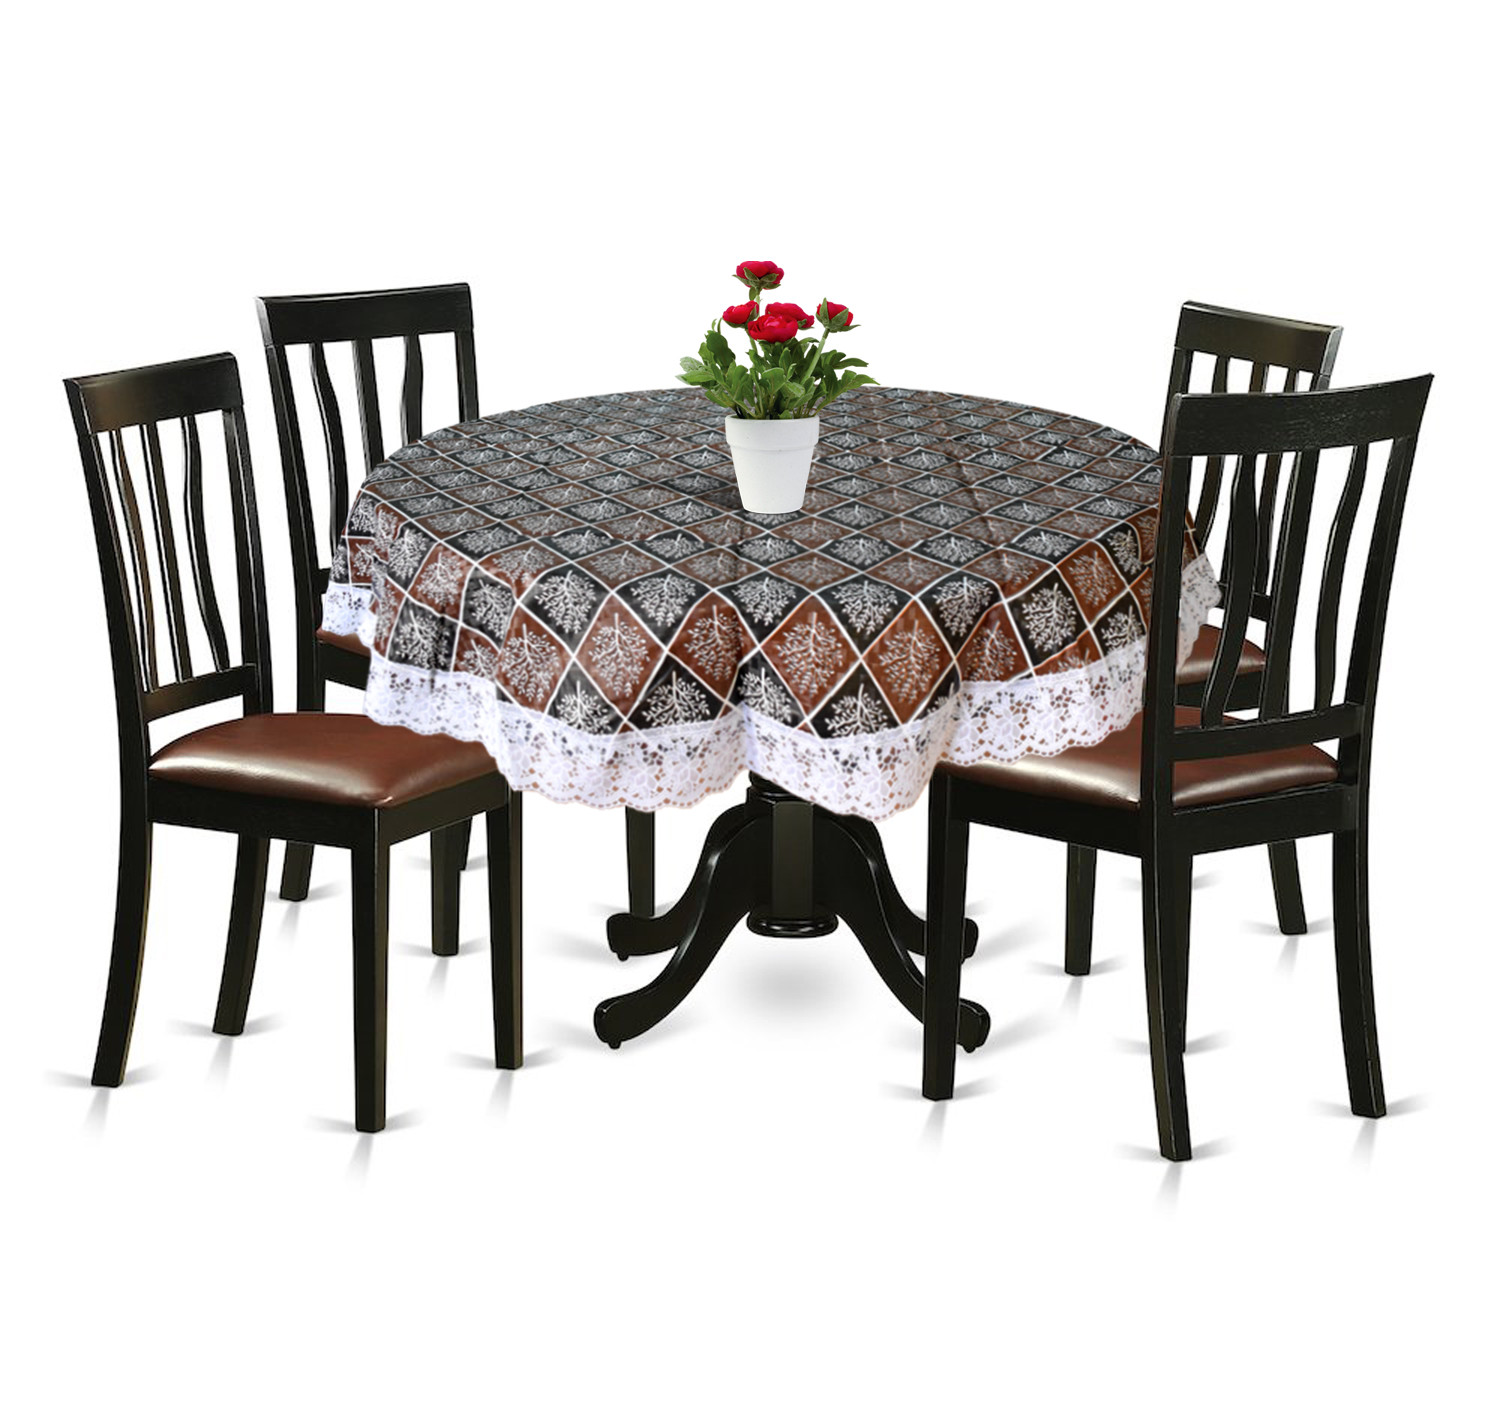 Kuber Industries Leaf Printed PVC 4 Seater Round Shape Table Cover, Protector With White Lace Border, 60